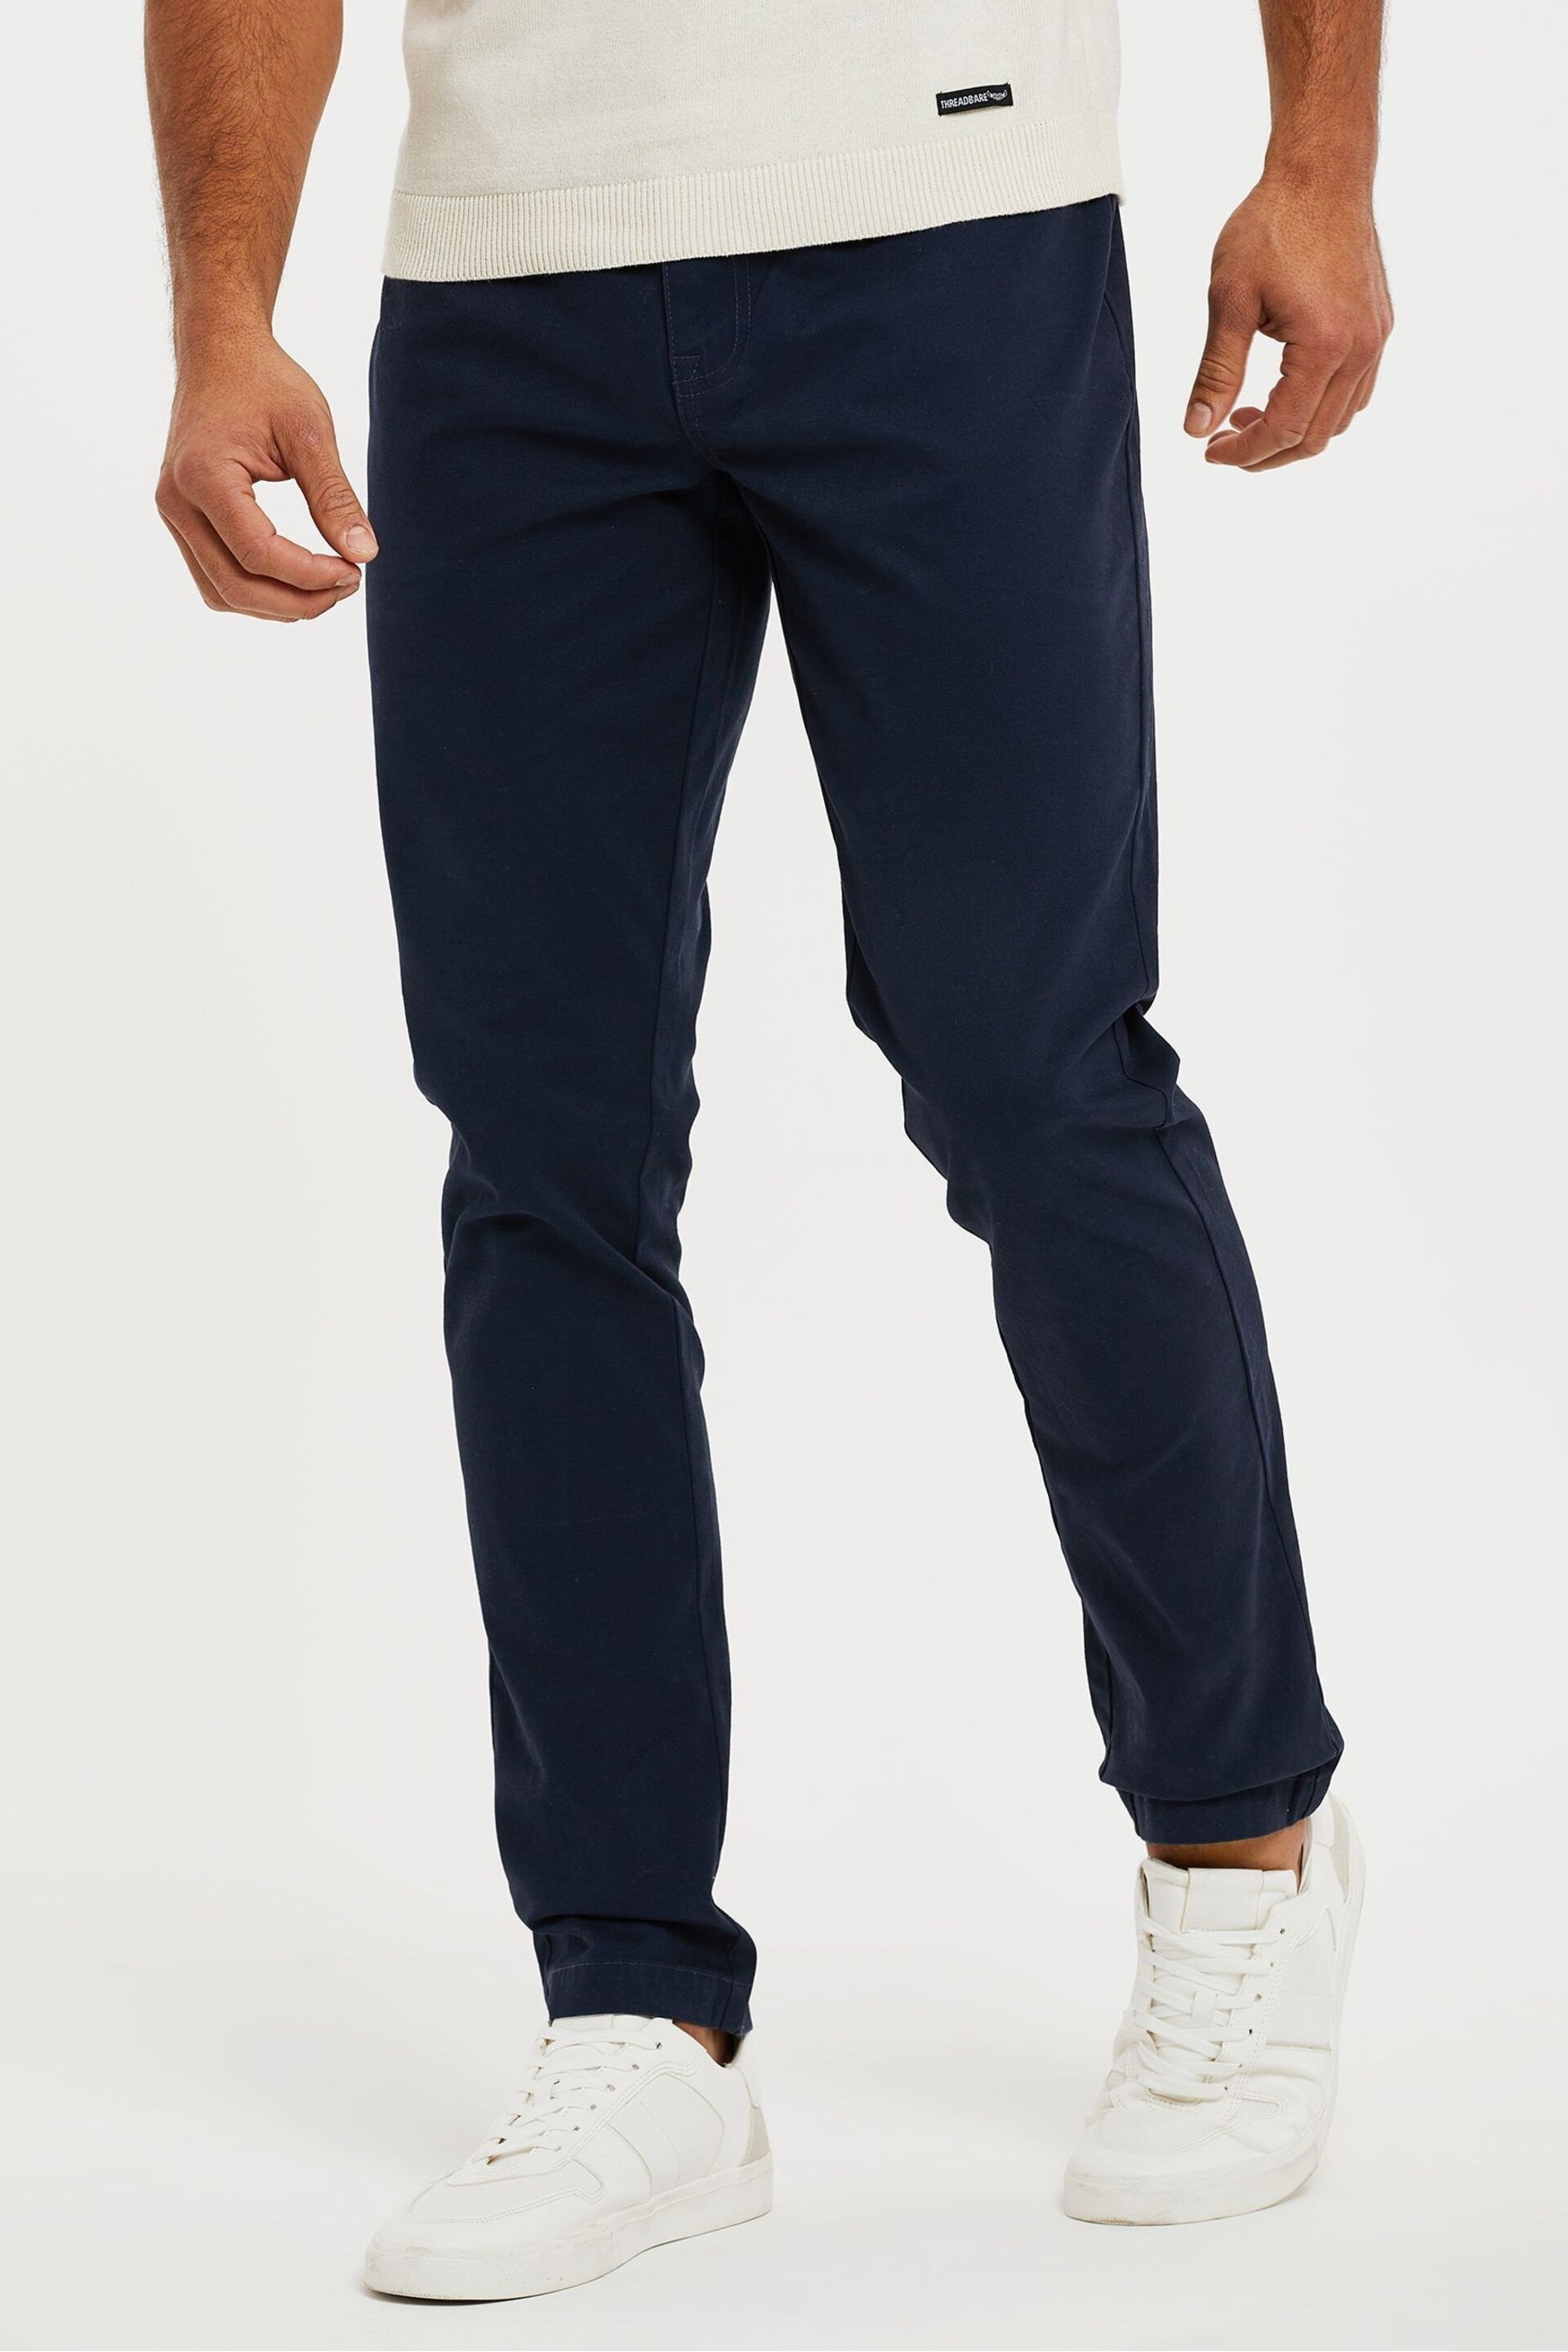 Threadbare Blue Drawcord Chino Trousers With Stretch - Image 1 of 4